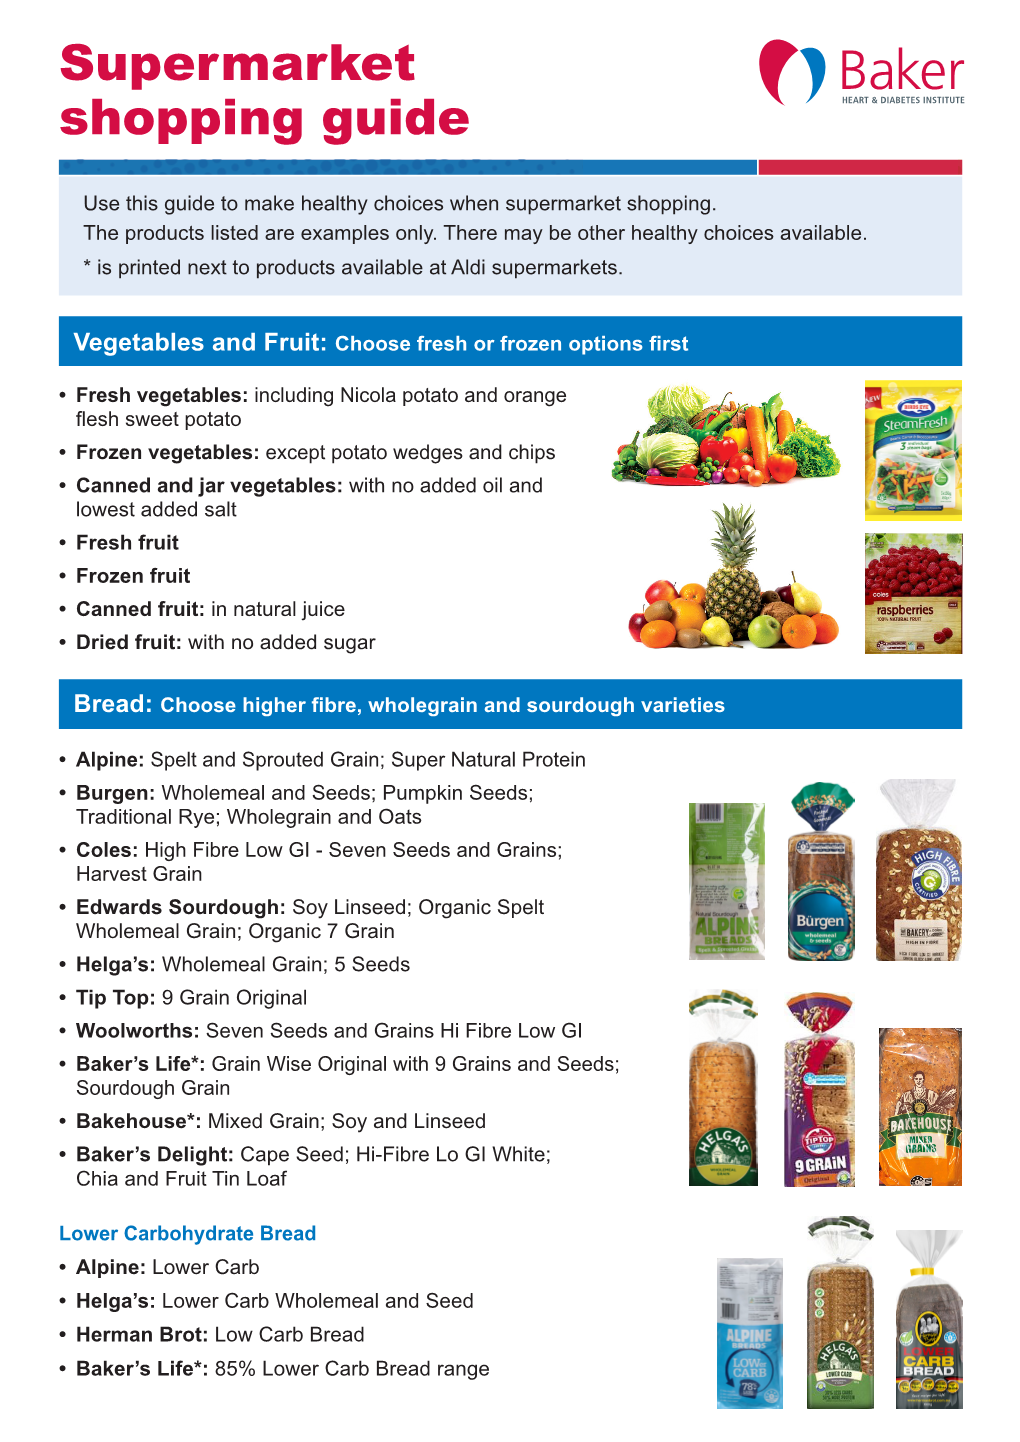 Supermarket Shopping Guide | Baker Heart and Diabetes Institute